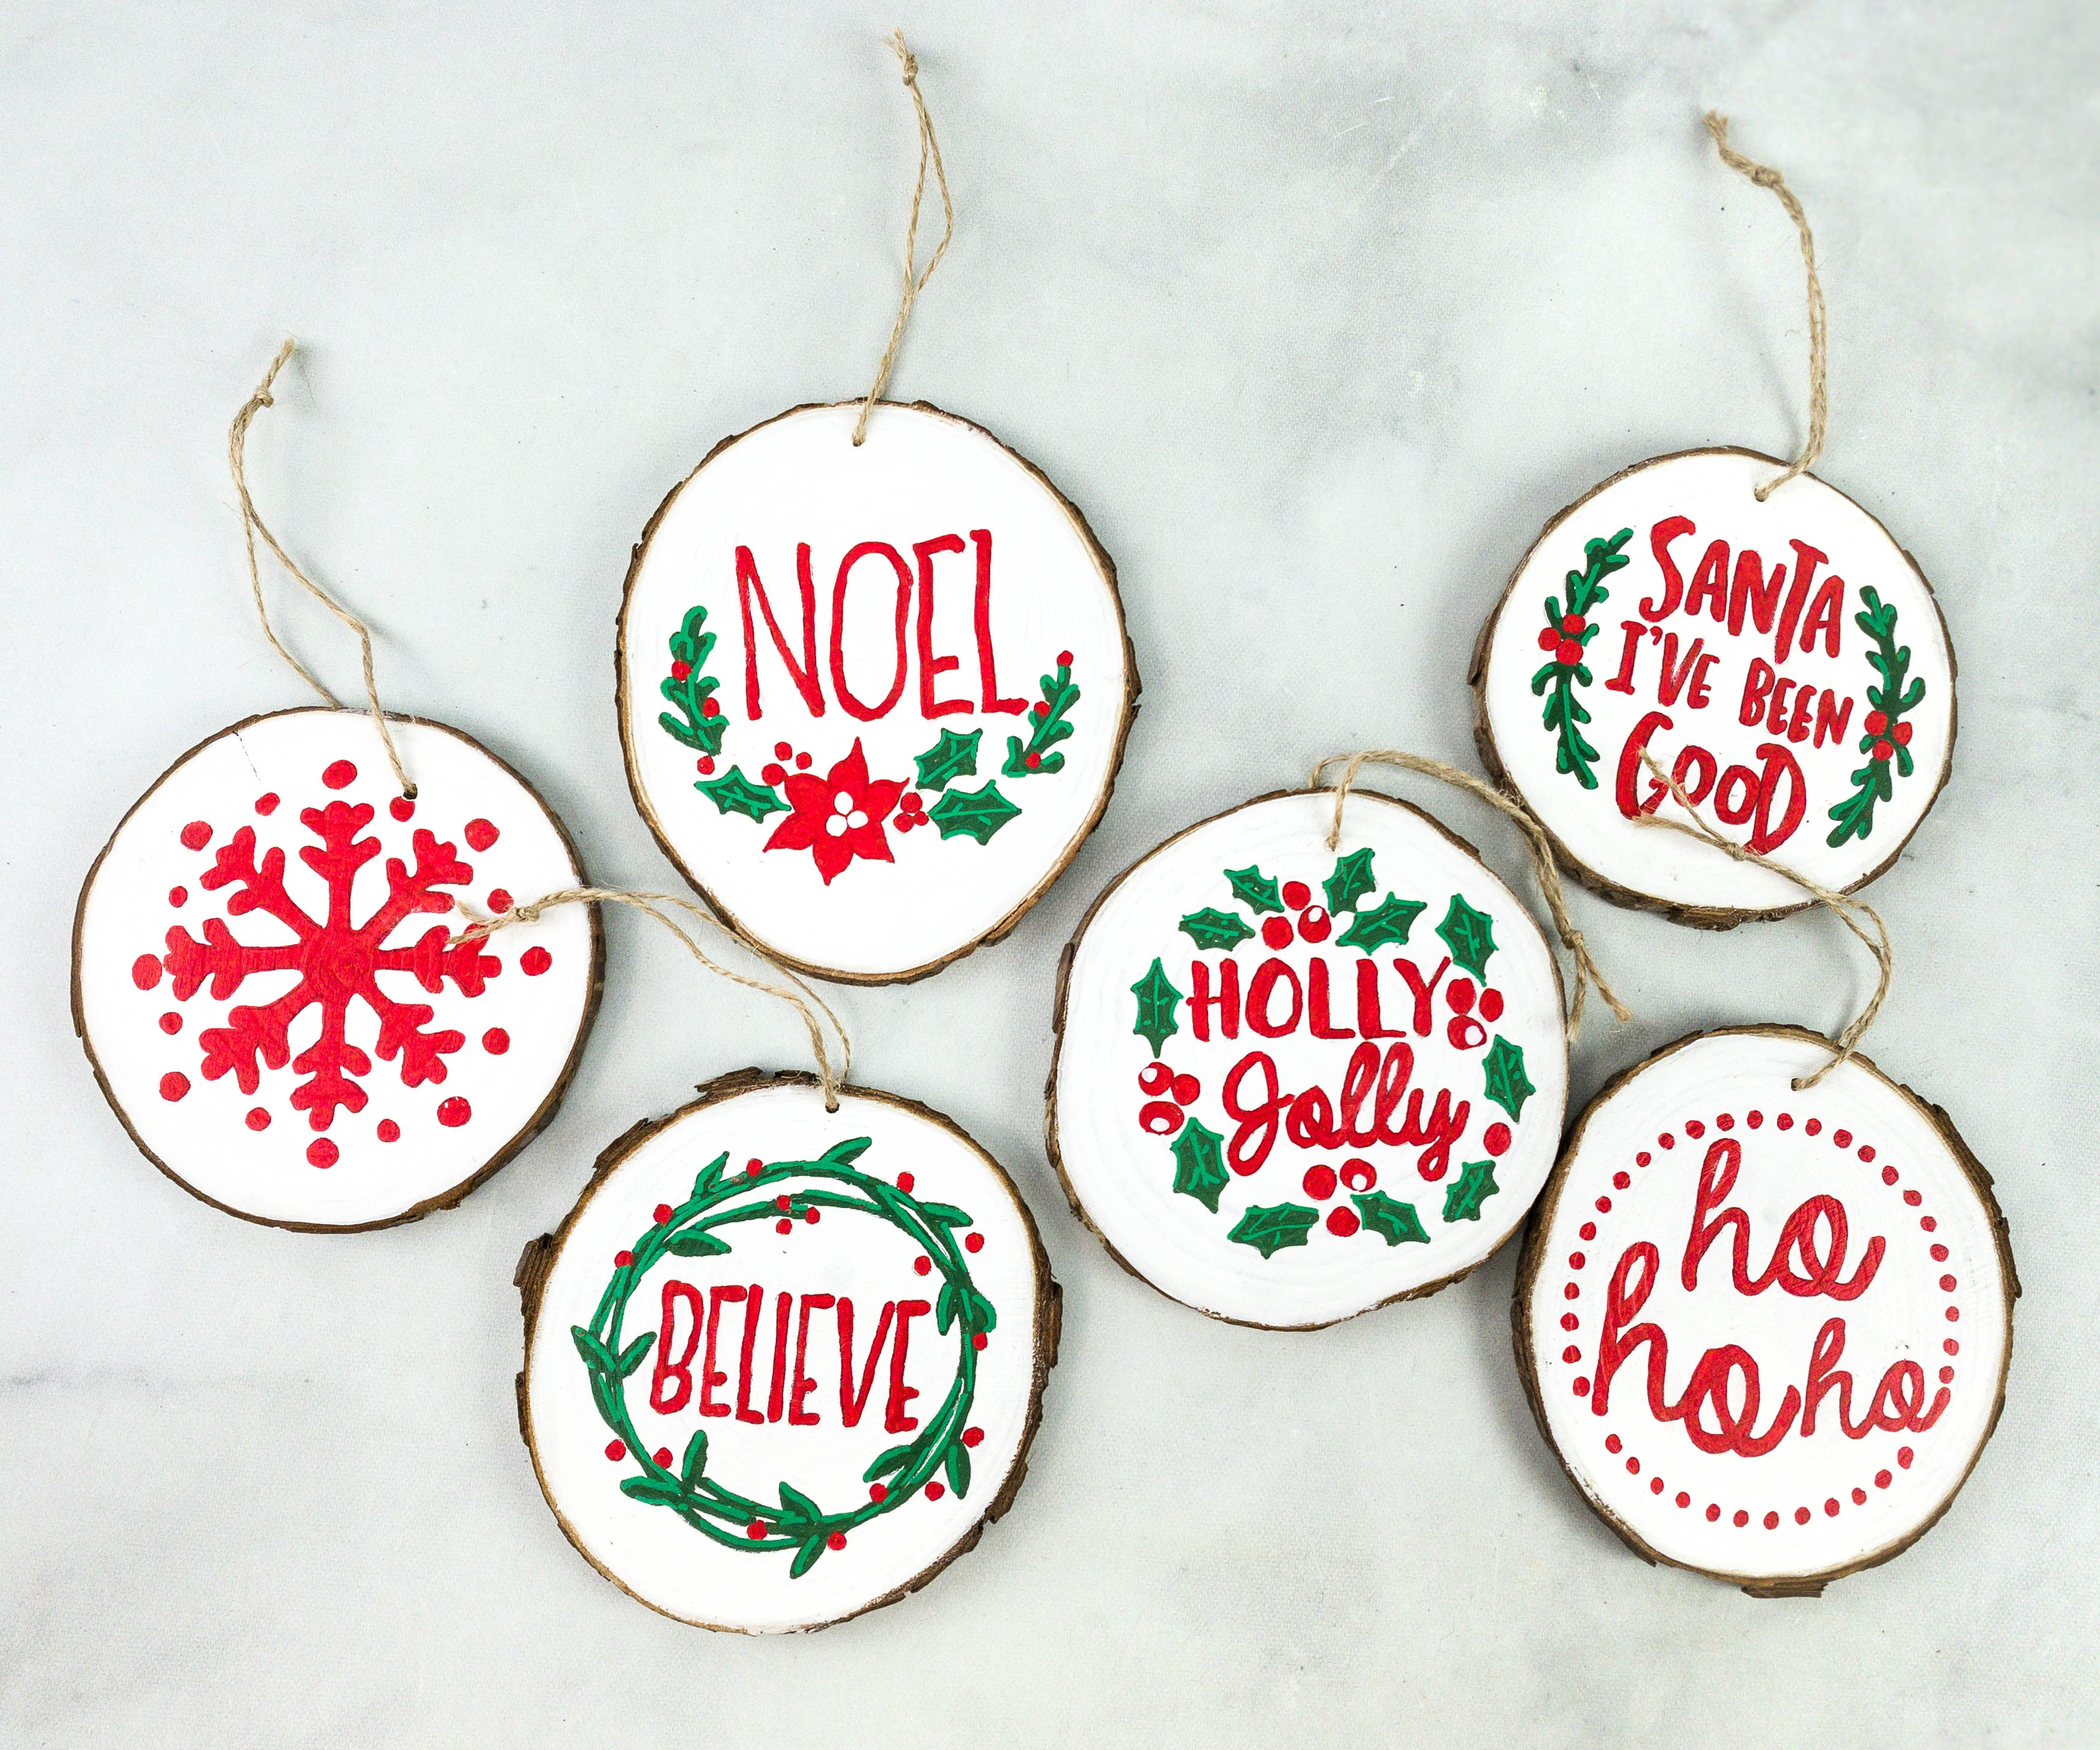 Annie's Christmas Ornament Kit Club Reviews: Get All The Details At Hello  Subscription!